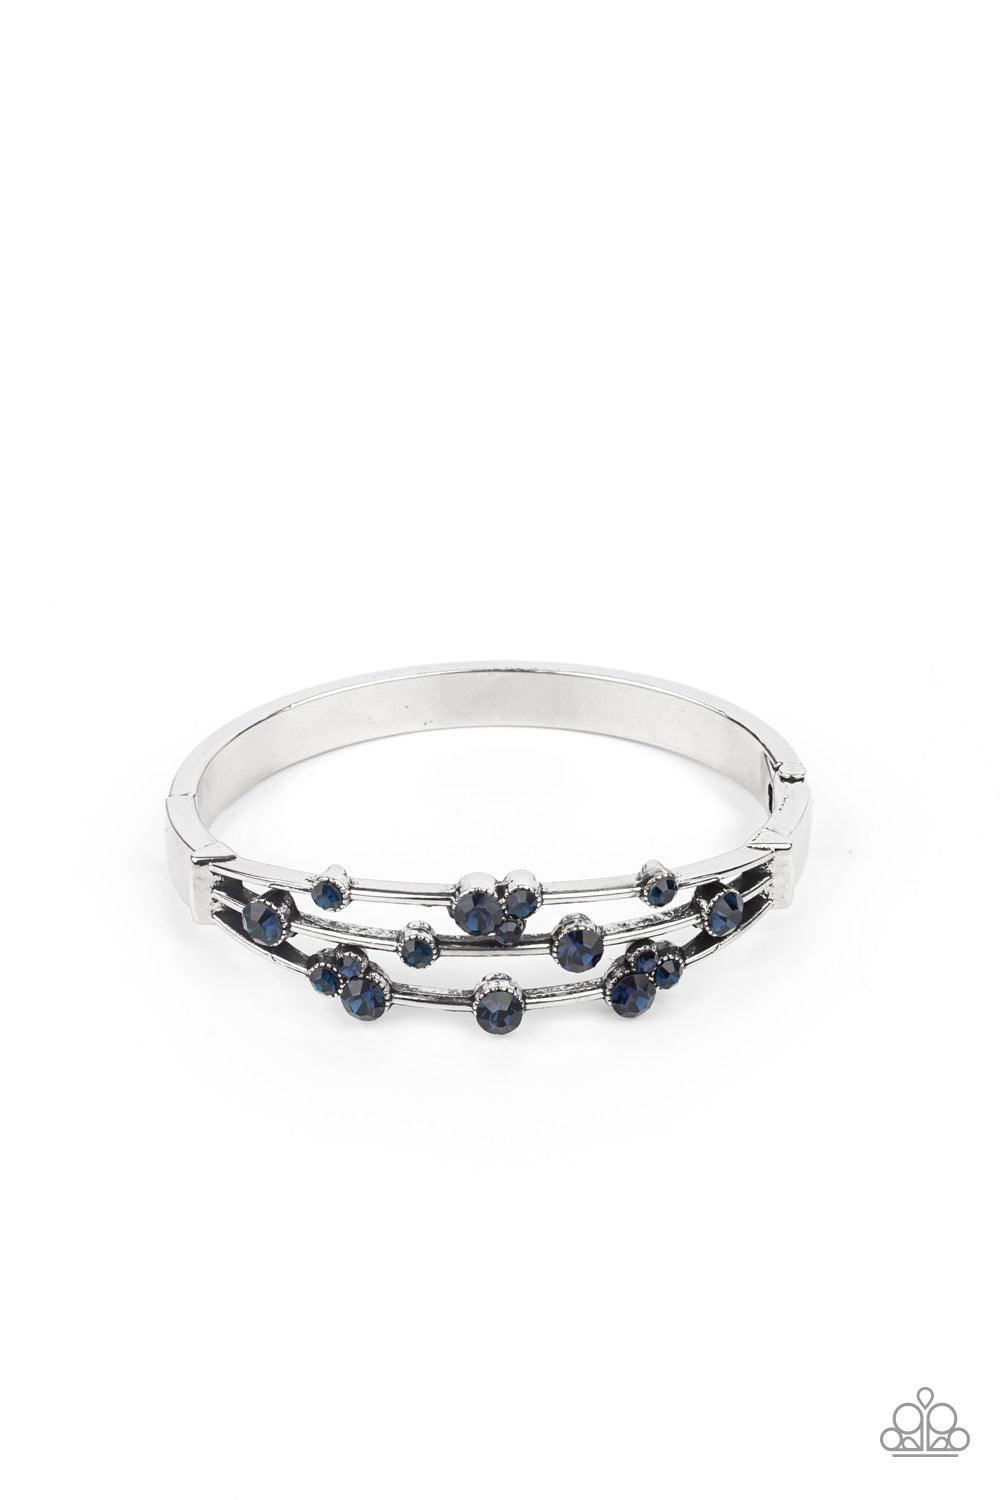 Paparazzi Accessories Cosmic Candescence - Blue A smattering of glittery blue rhinestones adorn three silver bars that coalesce into a versatile silver cuff-like bangle around the wrist. Features a hinged closure. Sold as one individual bracelet. Jewelry